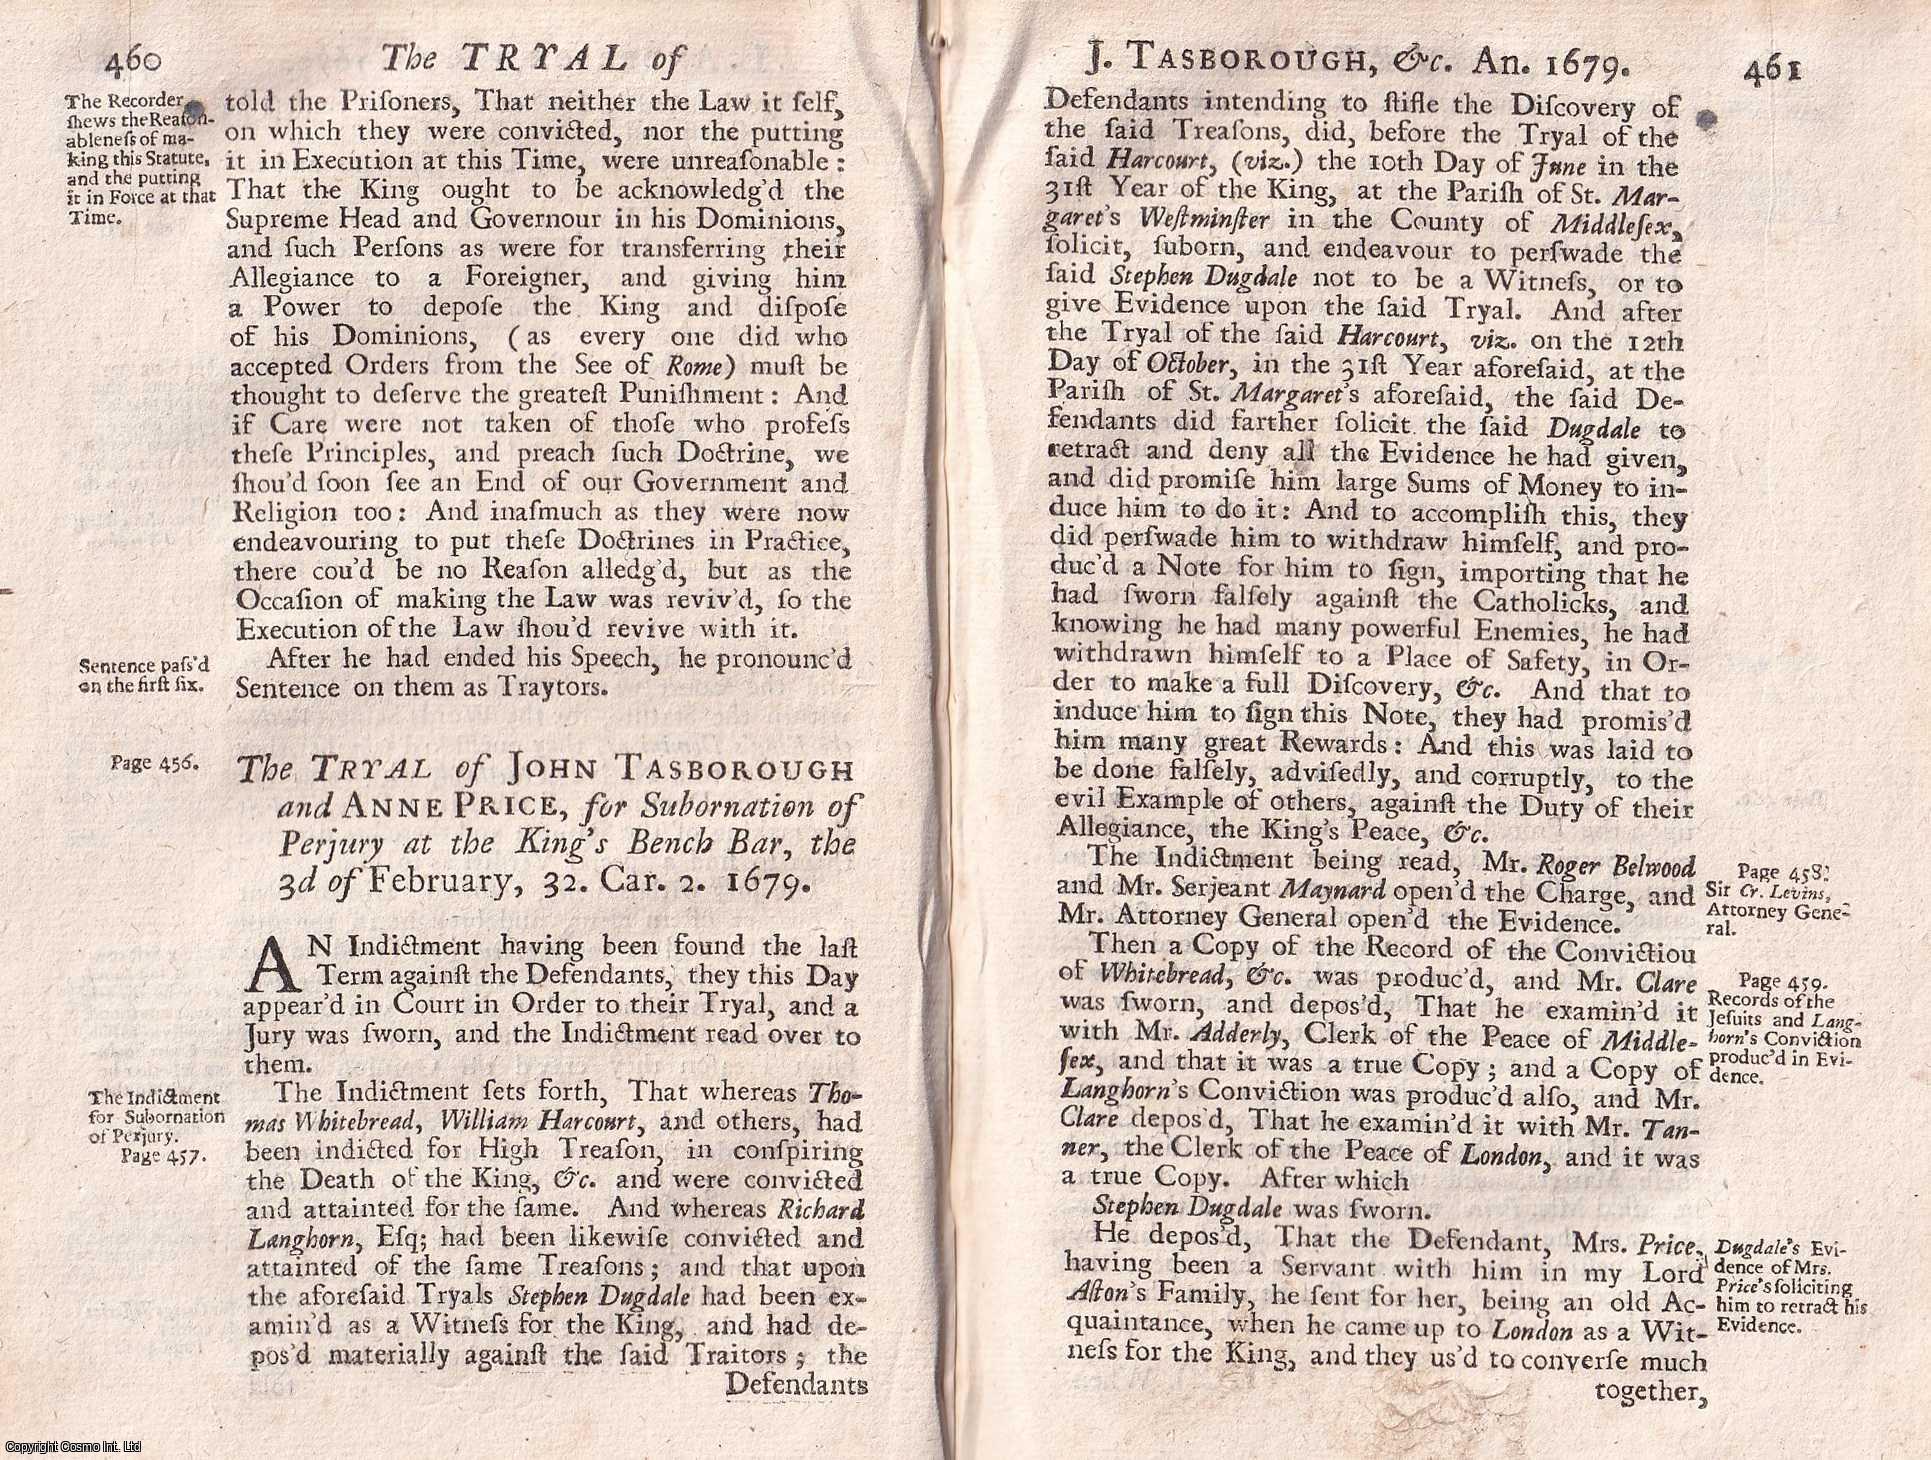 [Trial] - The Trial of John Tasborough and Anne Price, at The King's Bench, For Subornation of Perjury, 1679. An original report from the collected Tryals for High Treason, and Other Crimes, 1720.